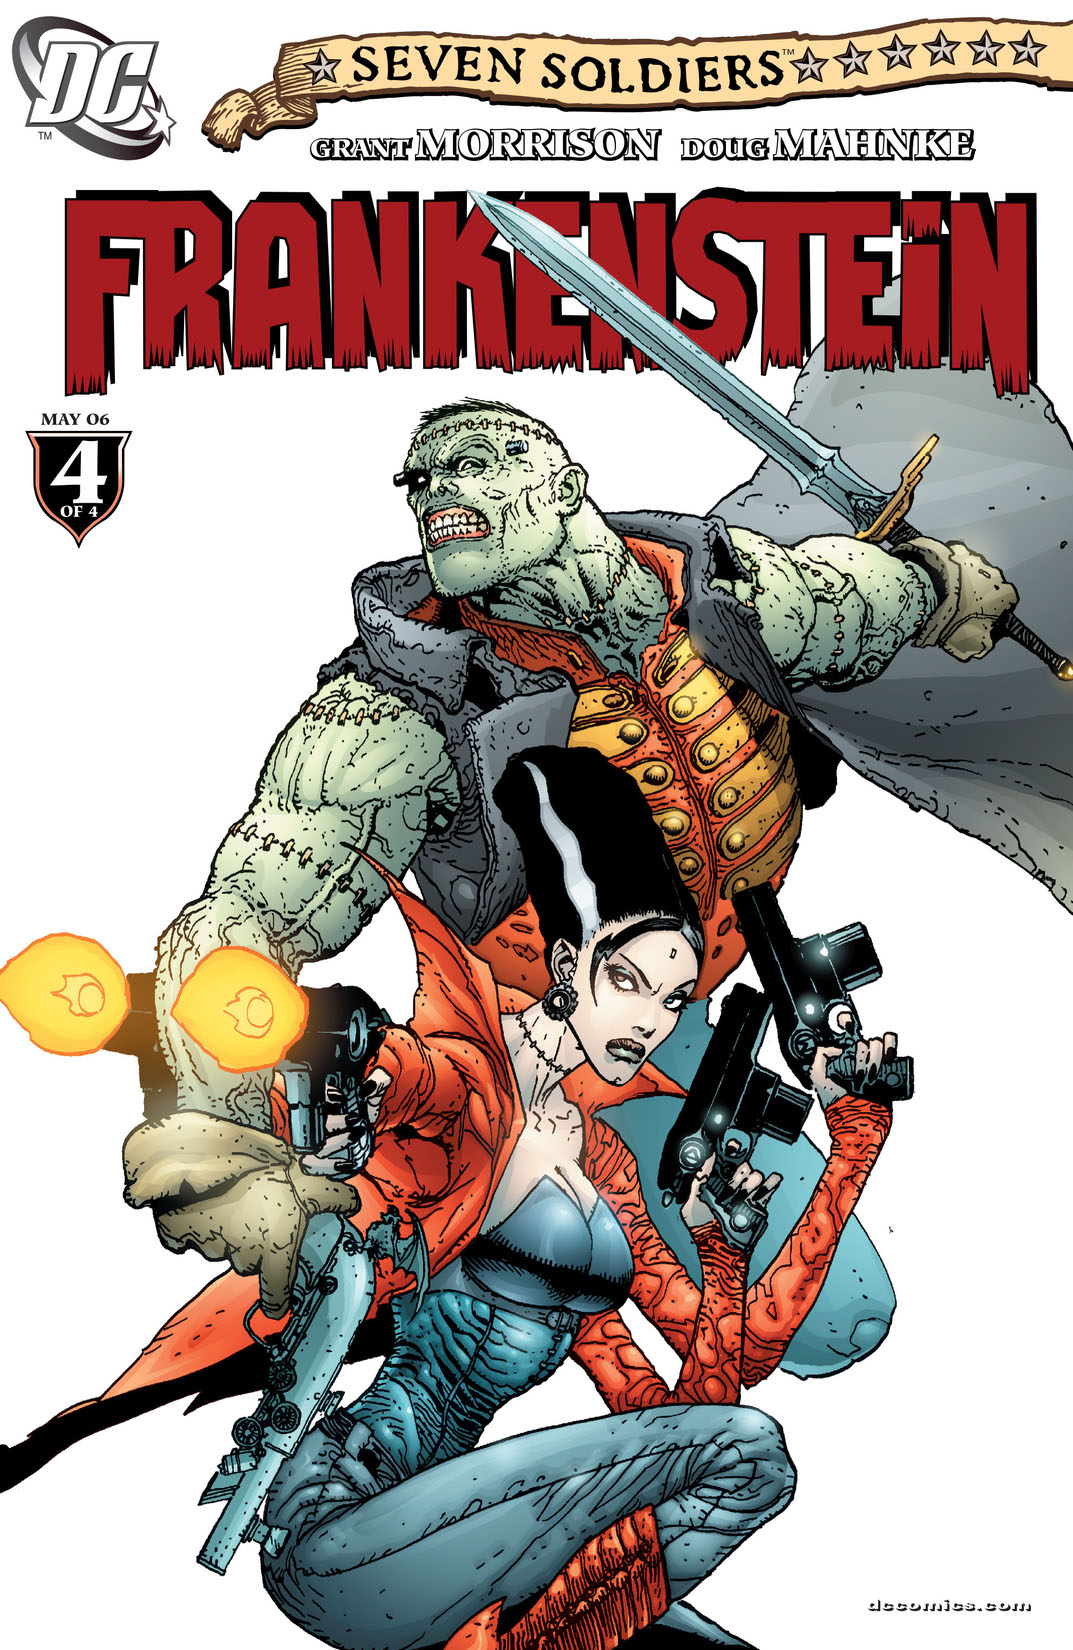 Seven Soldiers: Frankenstein #4 preview images